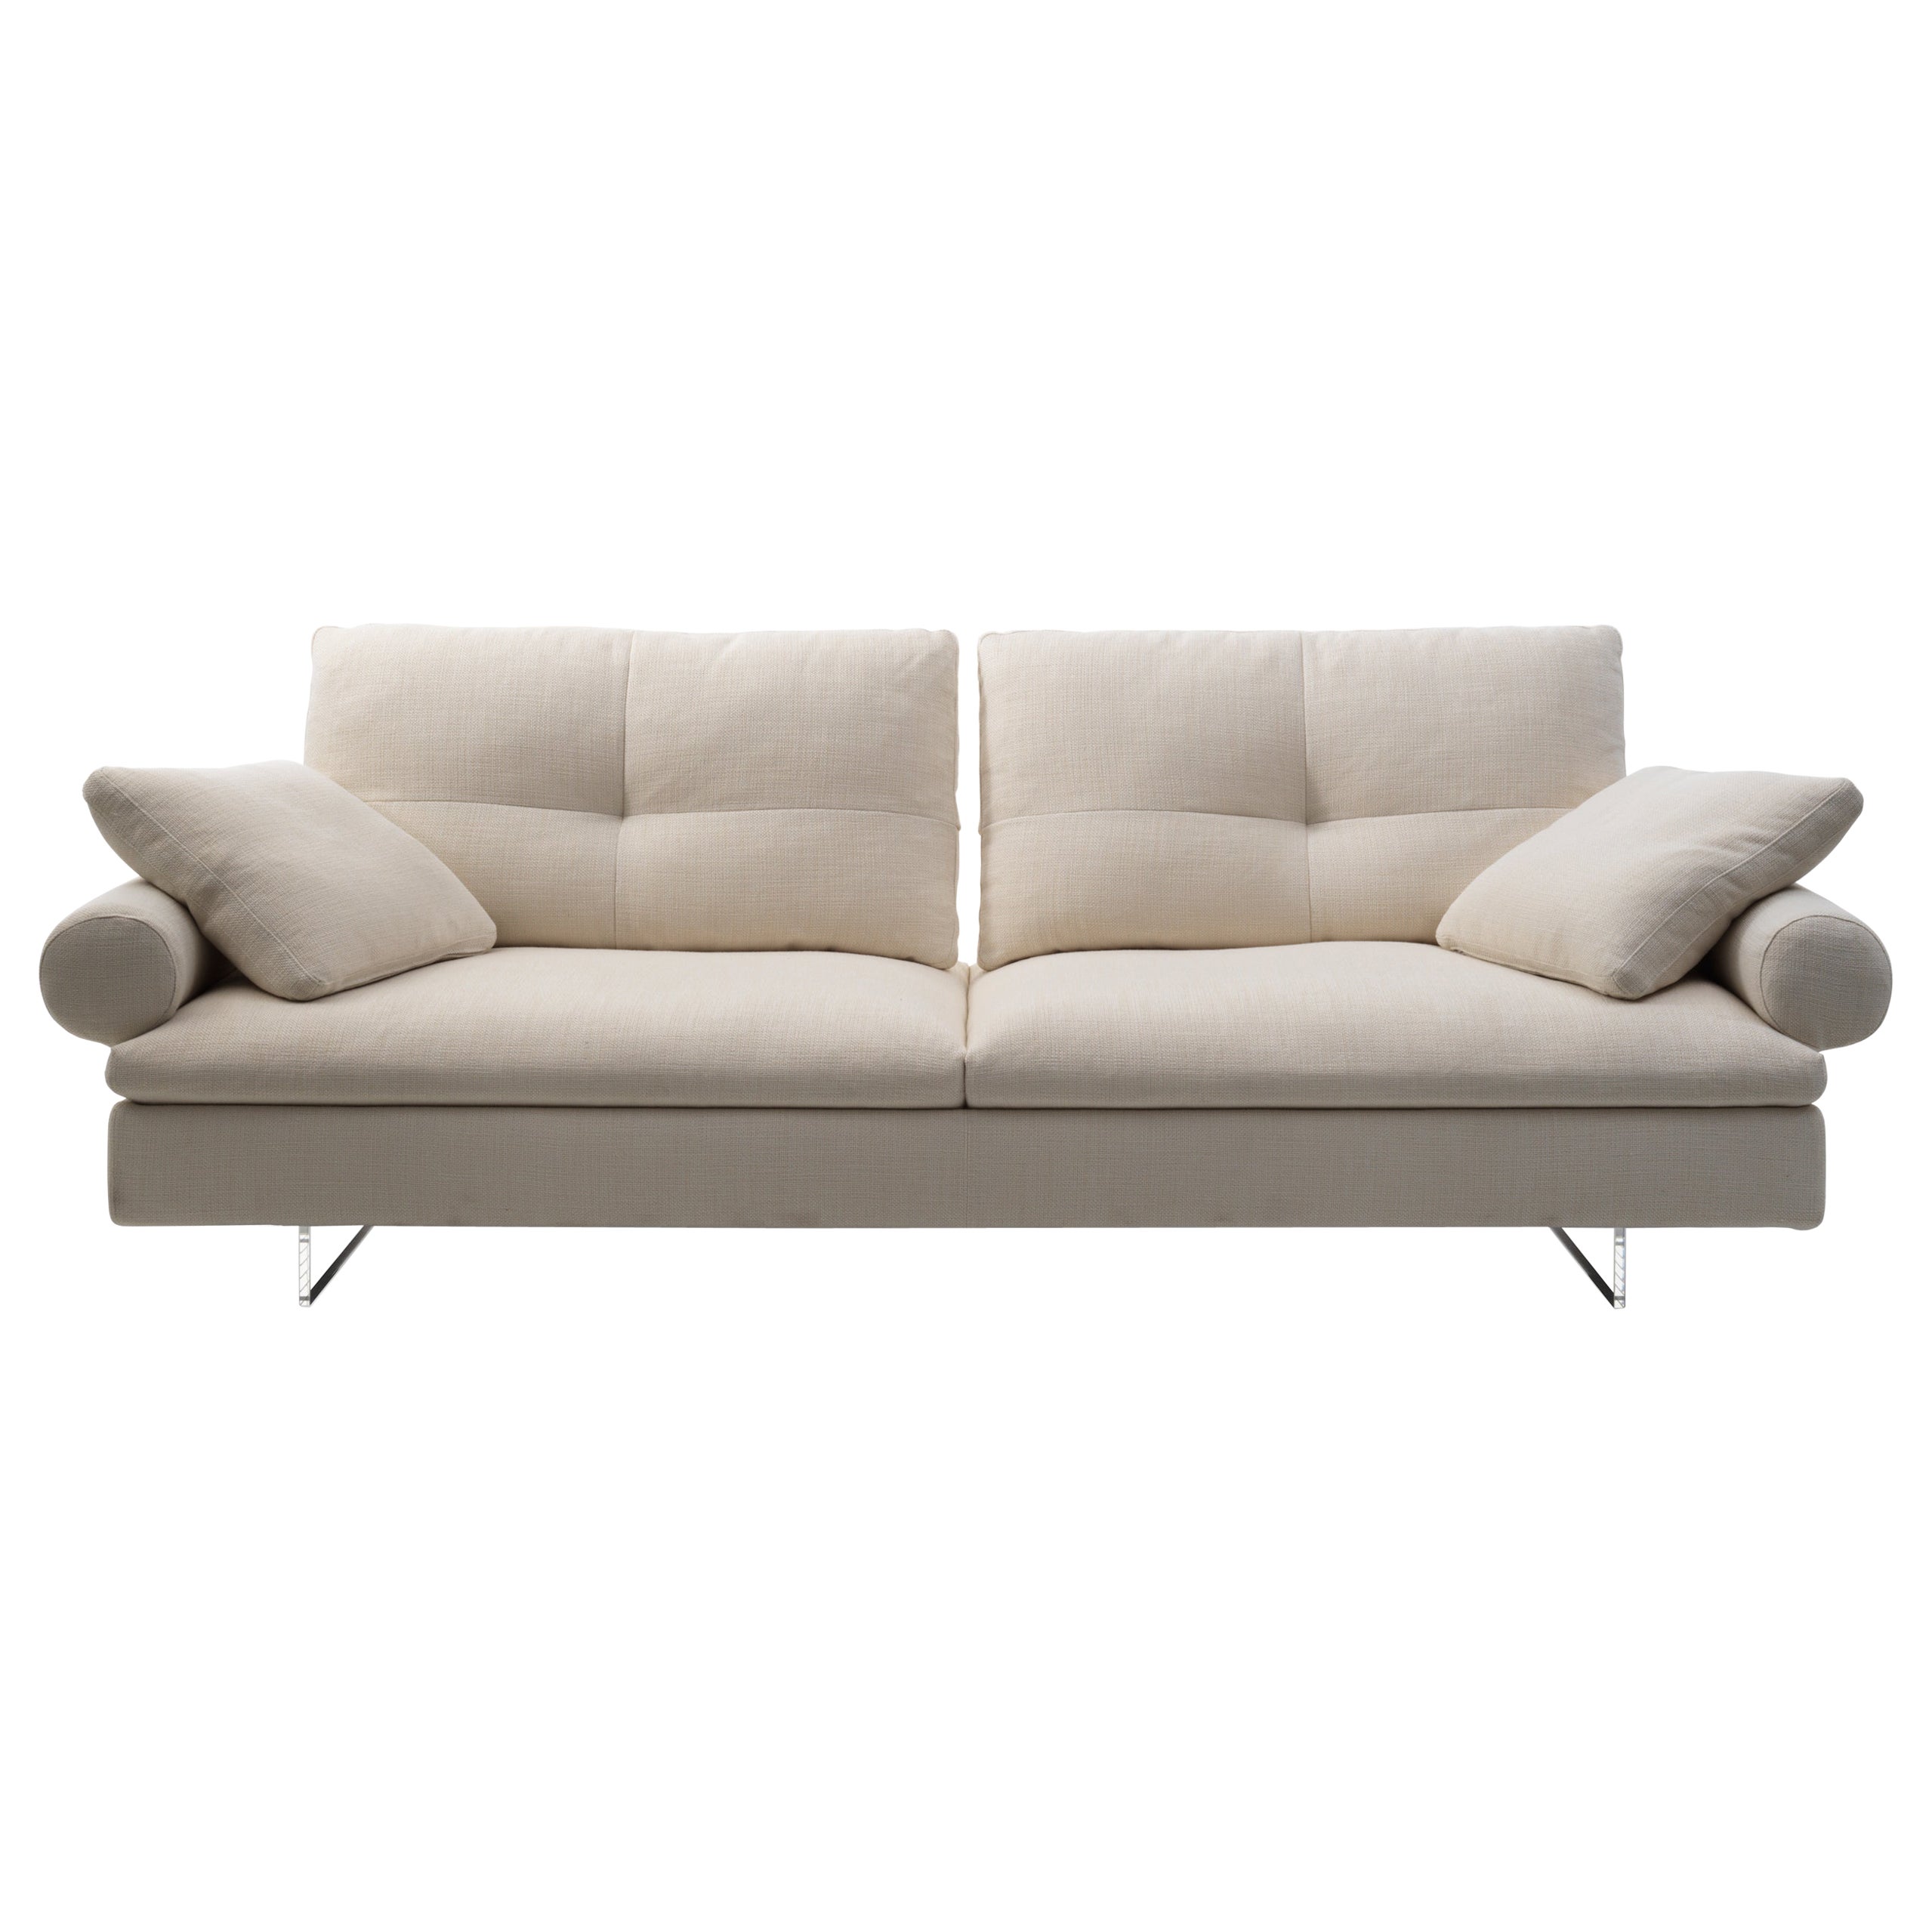 Limes New 80 Large Sofa in Beige Upholstery with Roll Armrest by Sergio Bicego For Sale